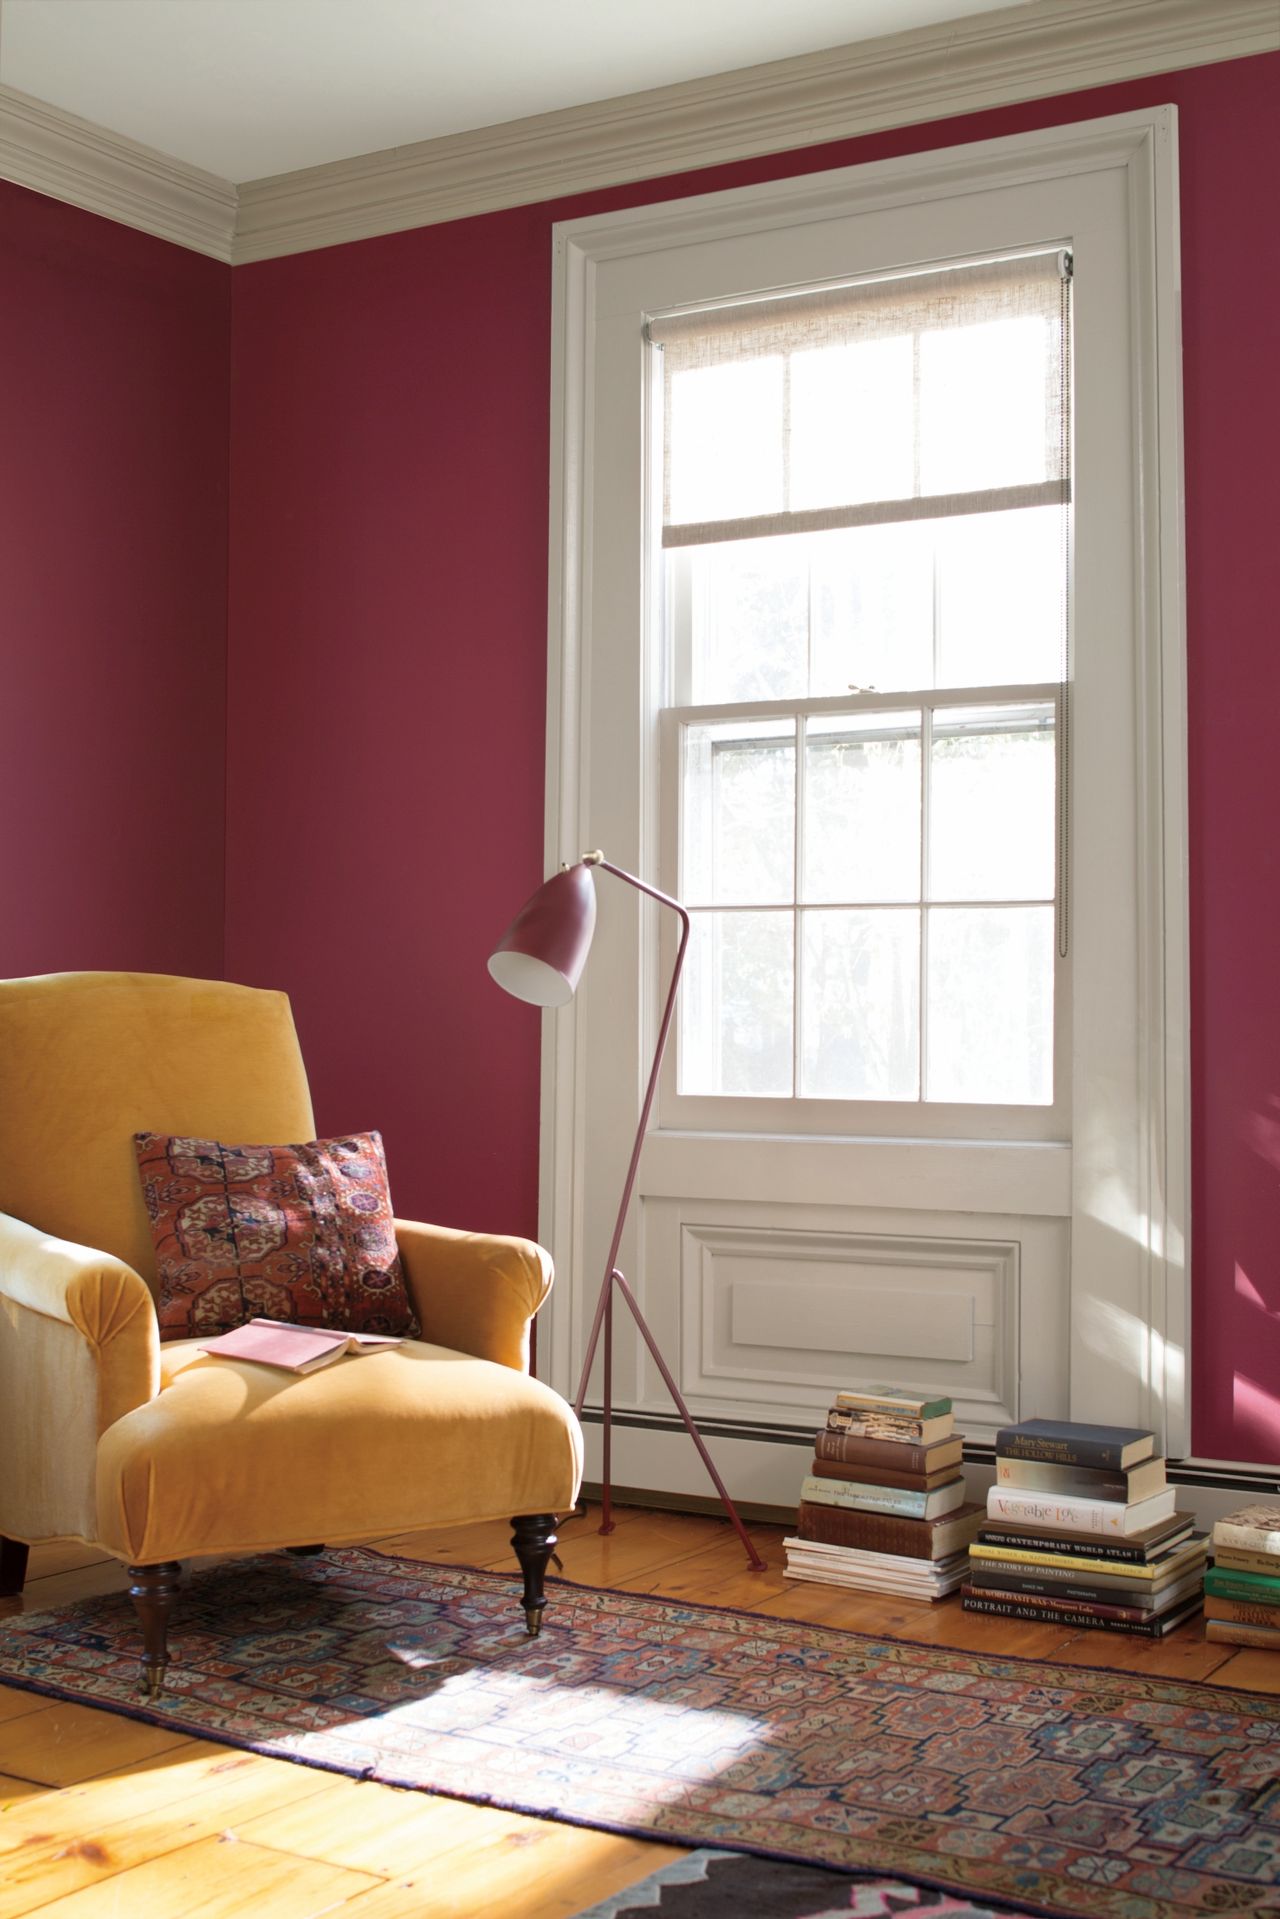 How to paint a room: expert tips for a professional finish | Homes ...